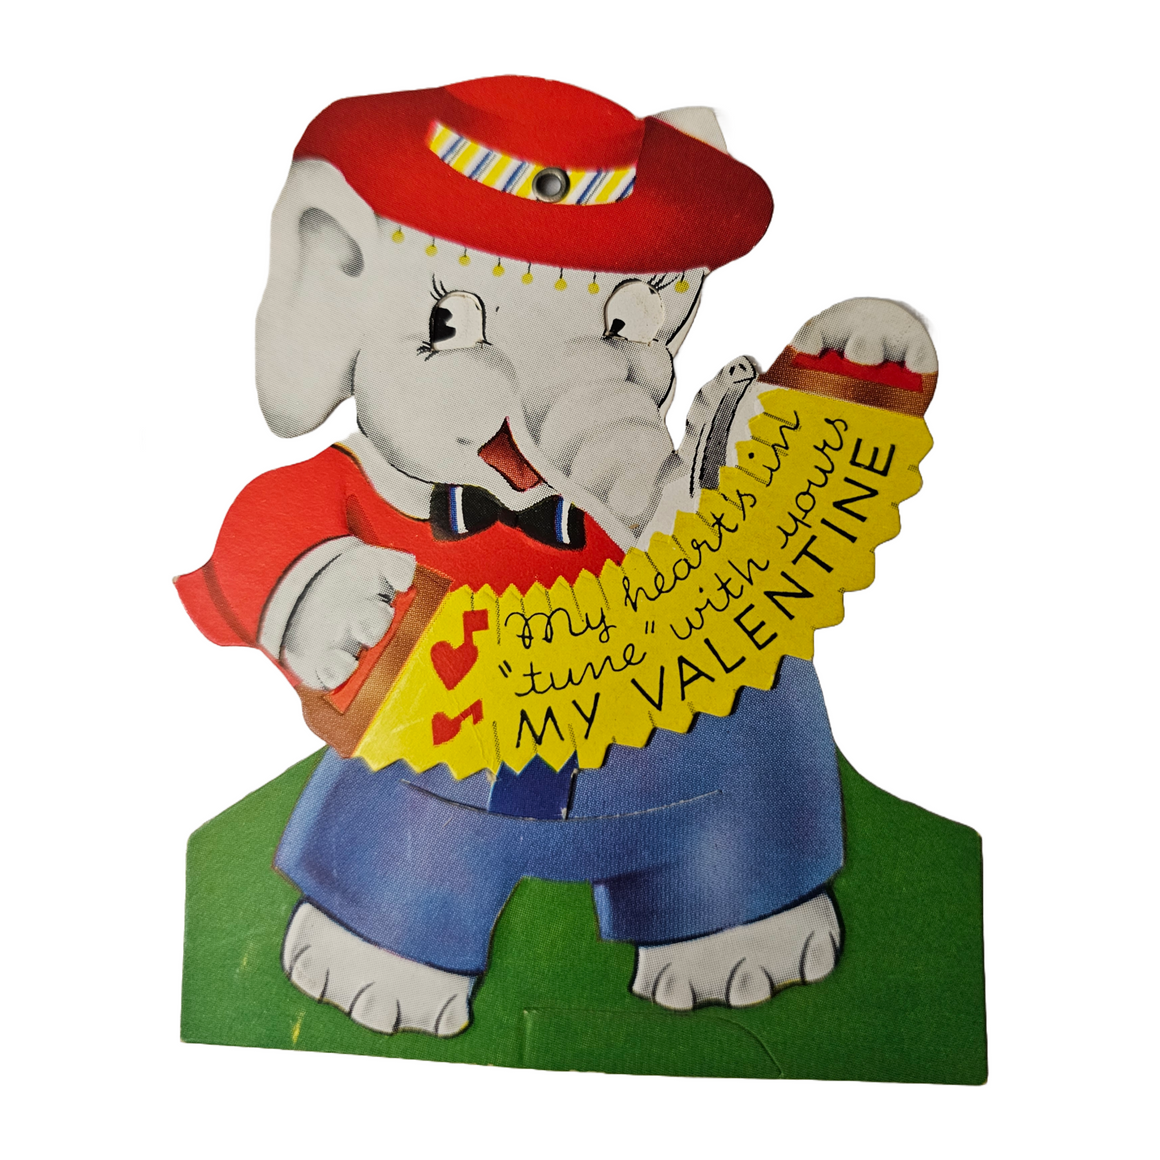 Vintage Die Cut Mechanical Valentine Card Humanized Elephant  in Suit Playing Accordion Ameri-Card 1940s